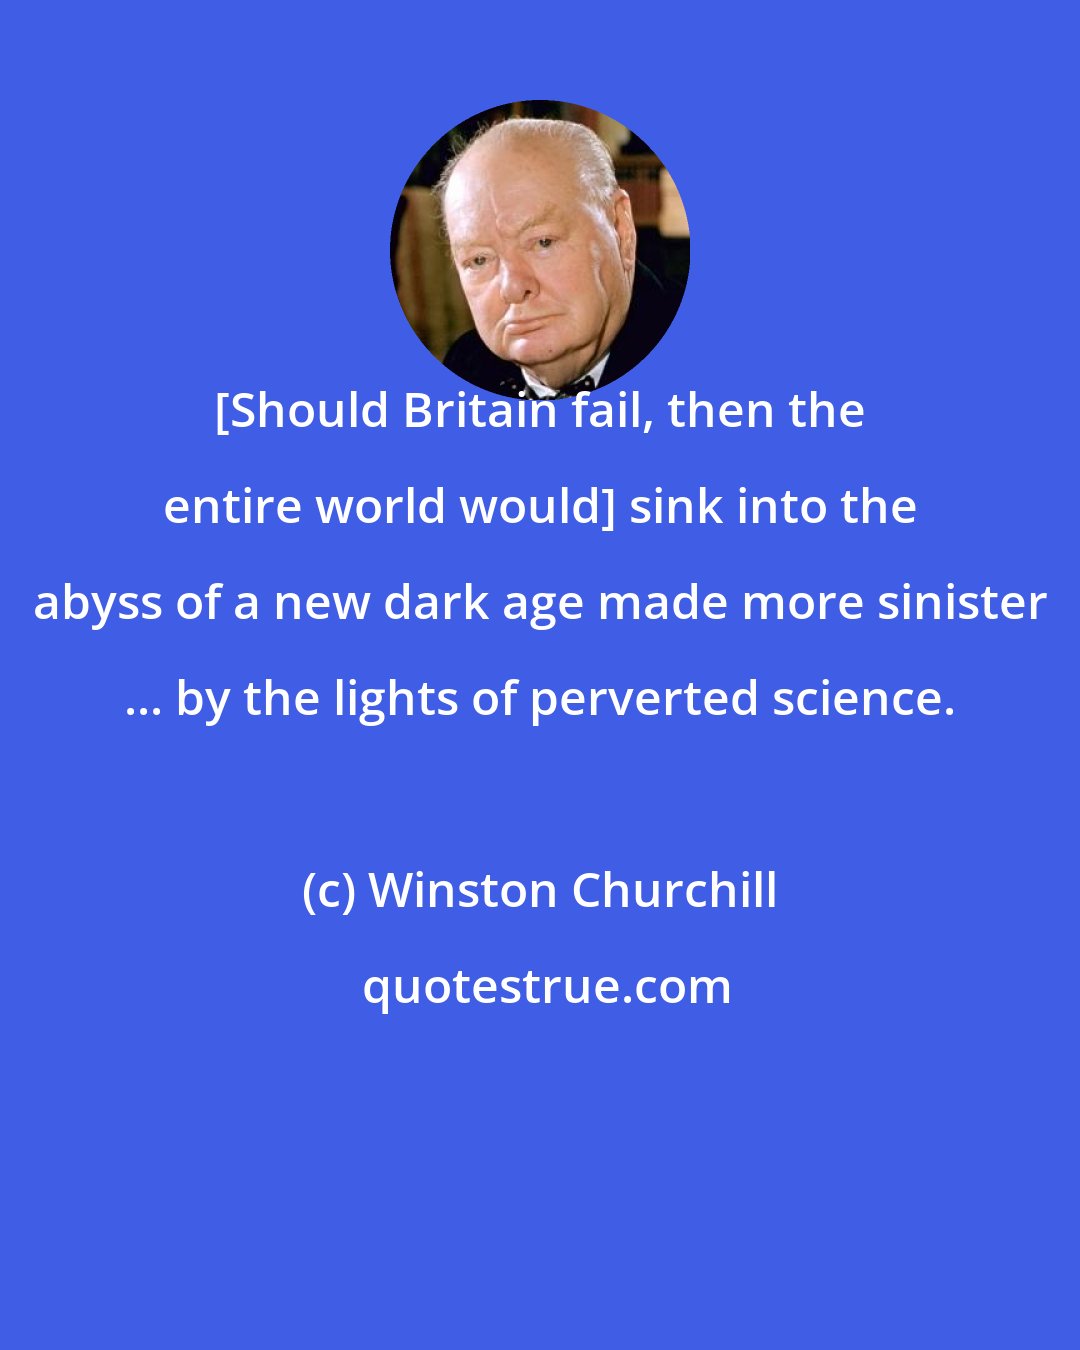 Winston Churchill: [Should Britain fail, then the entire world would] sink into the abyss of a new dark age made more sinister ... by the lights of perverted science.